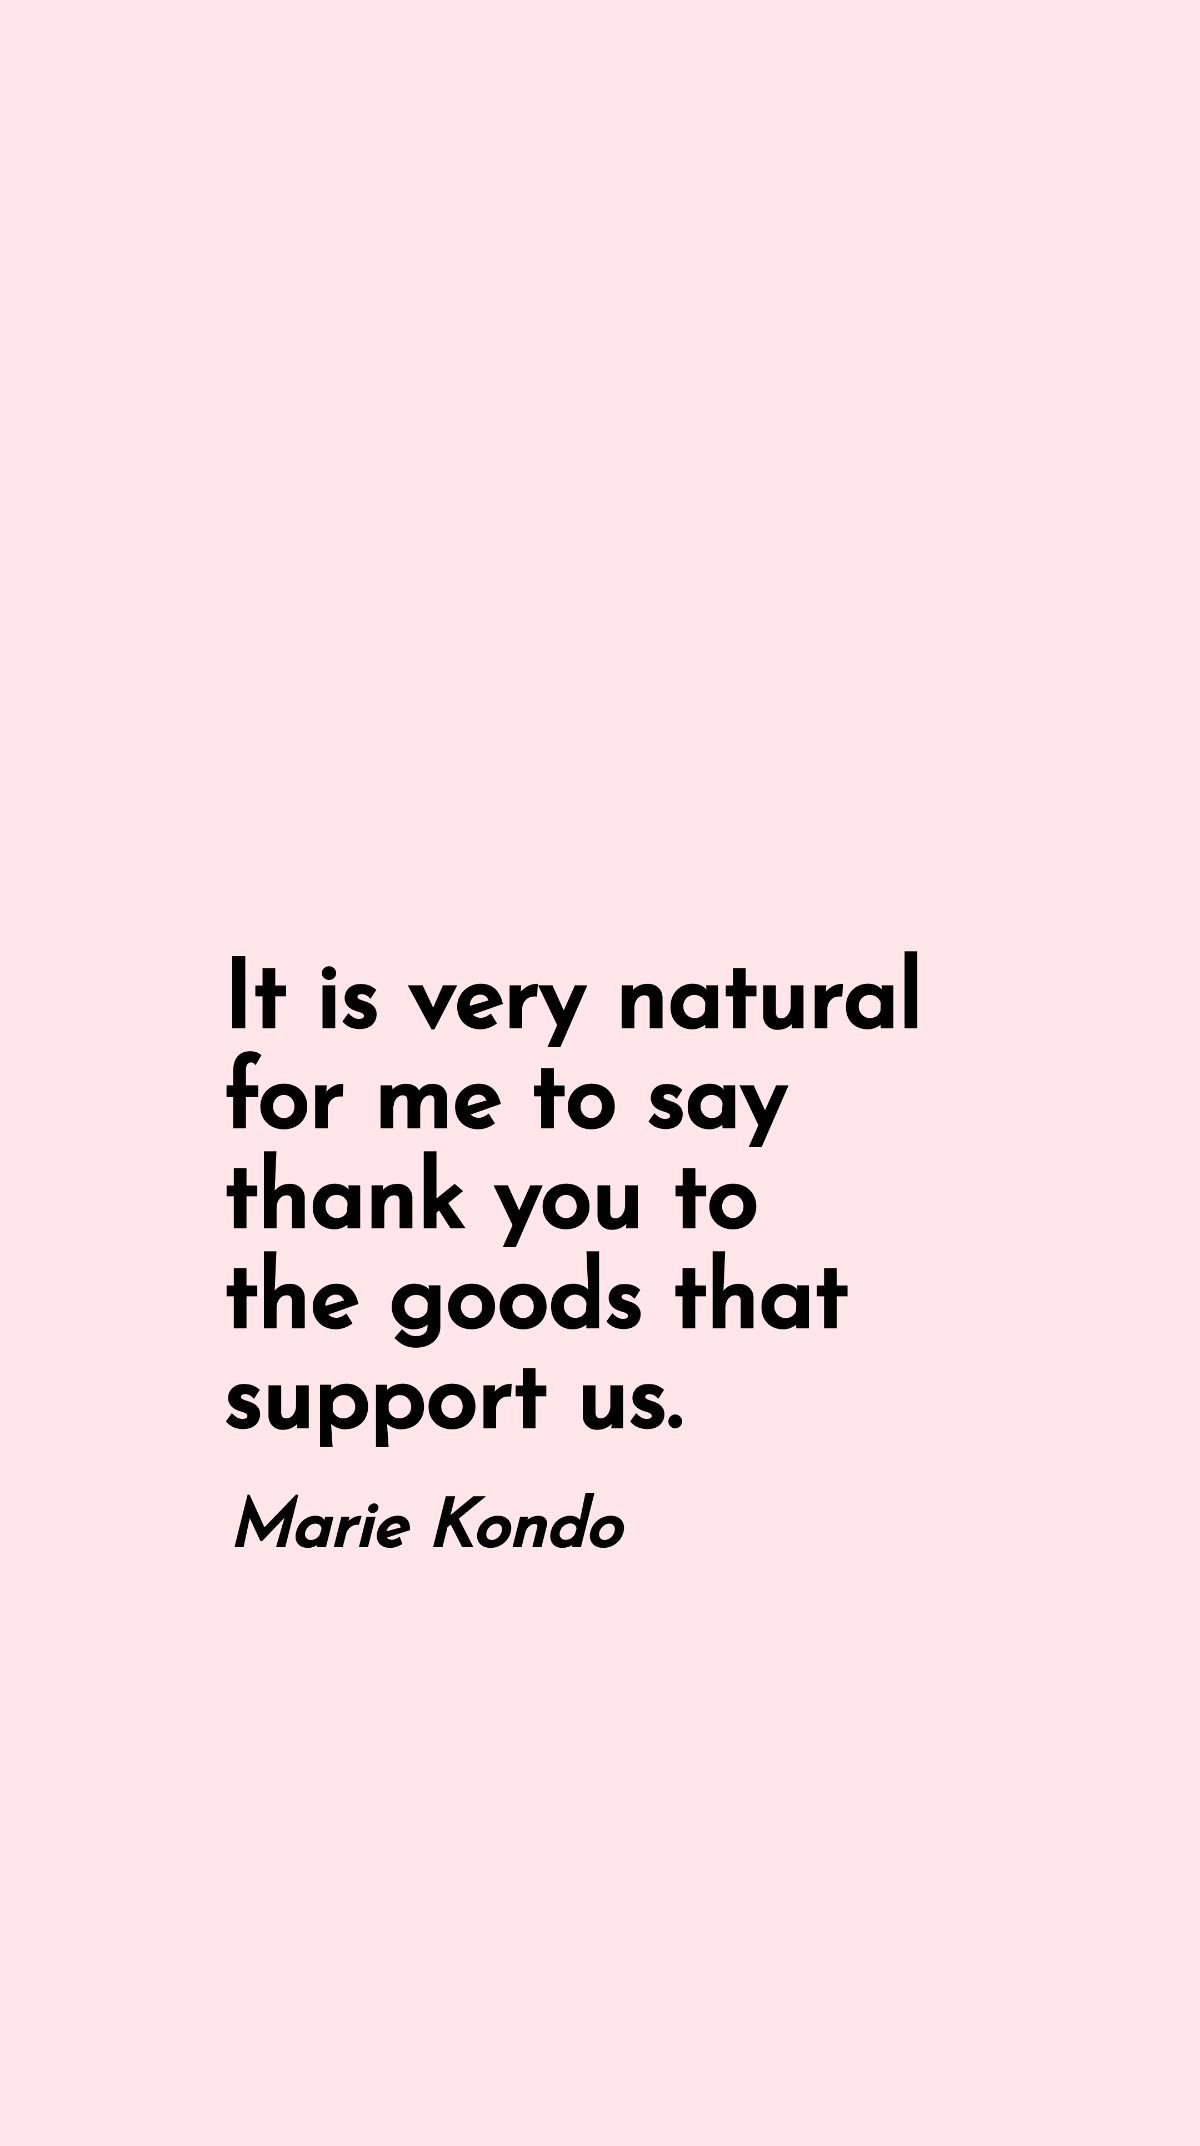 Marie Kondo - It is very natural for me to say thank you to the goods that support us.